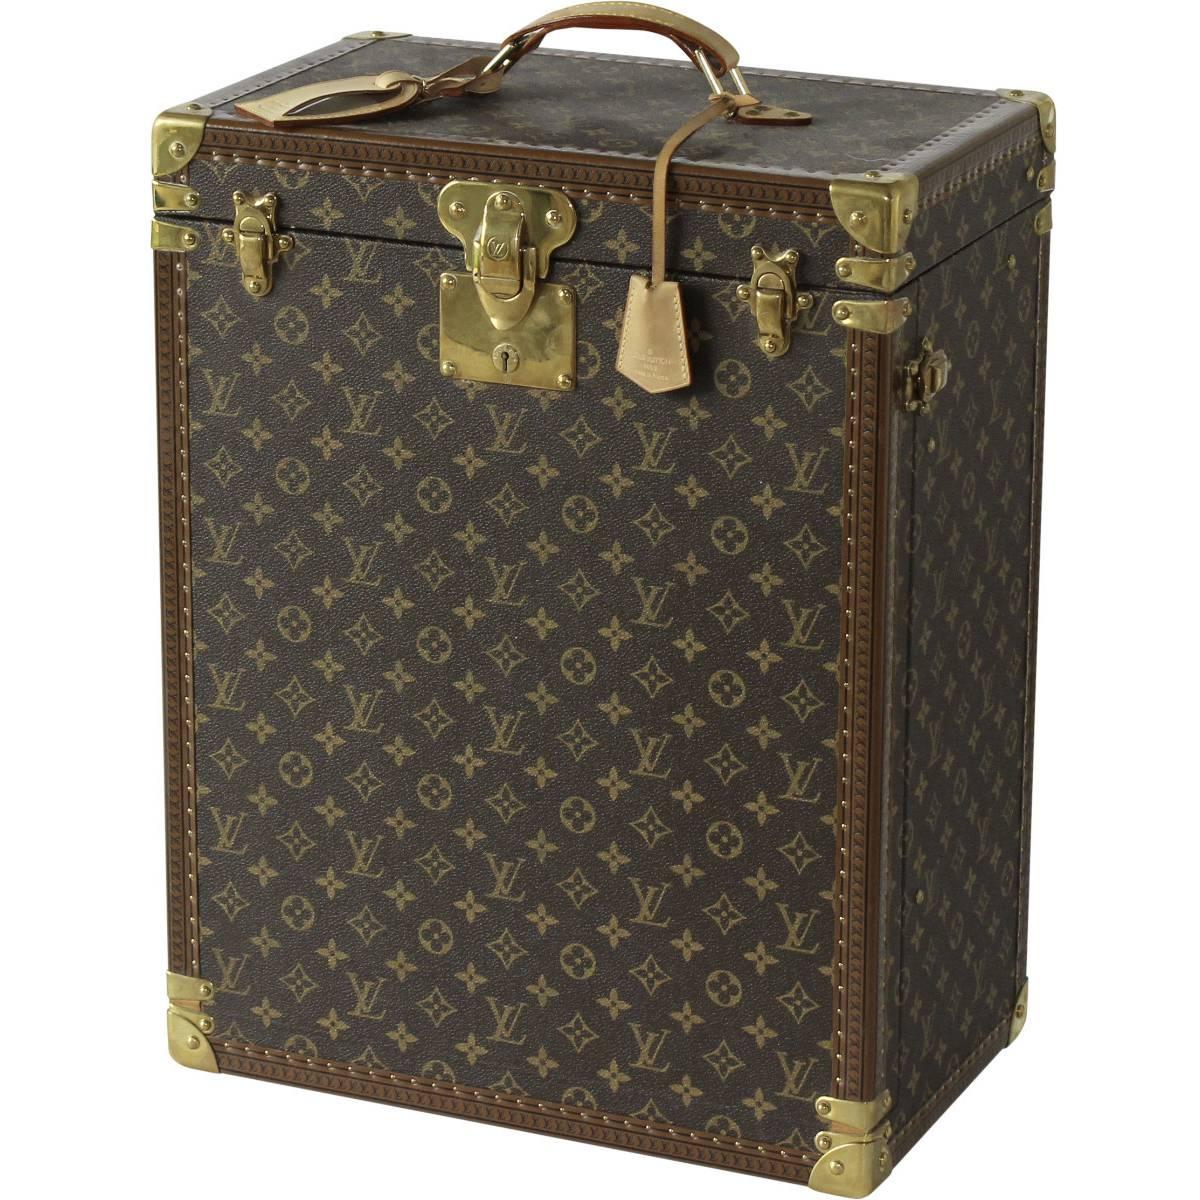 Custom-Made Louis Vuitton Jewelry and Watch Trunk